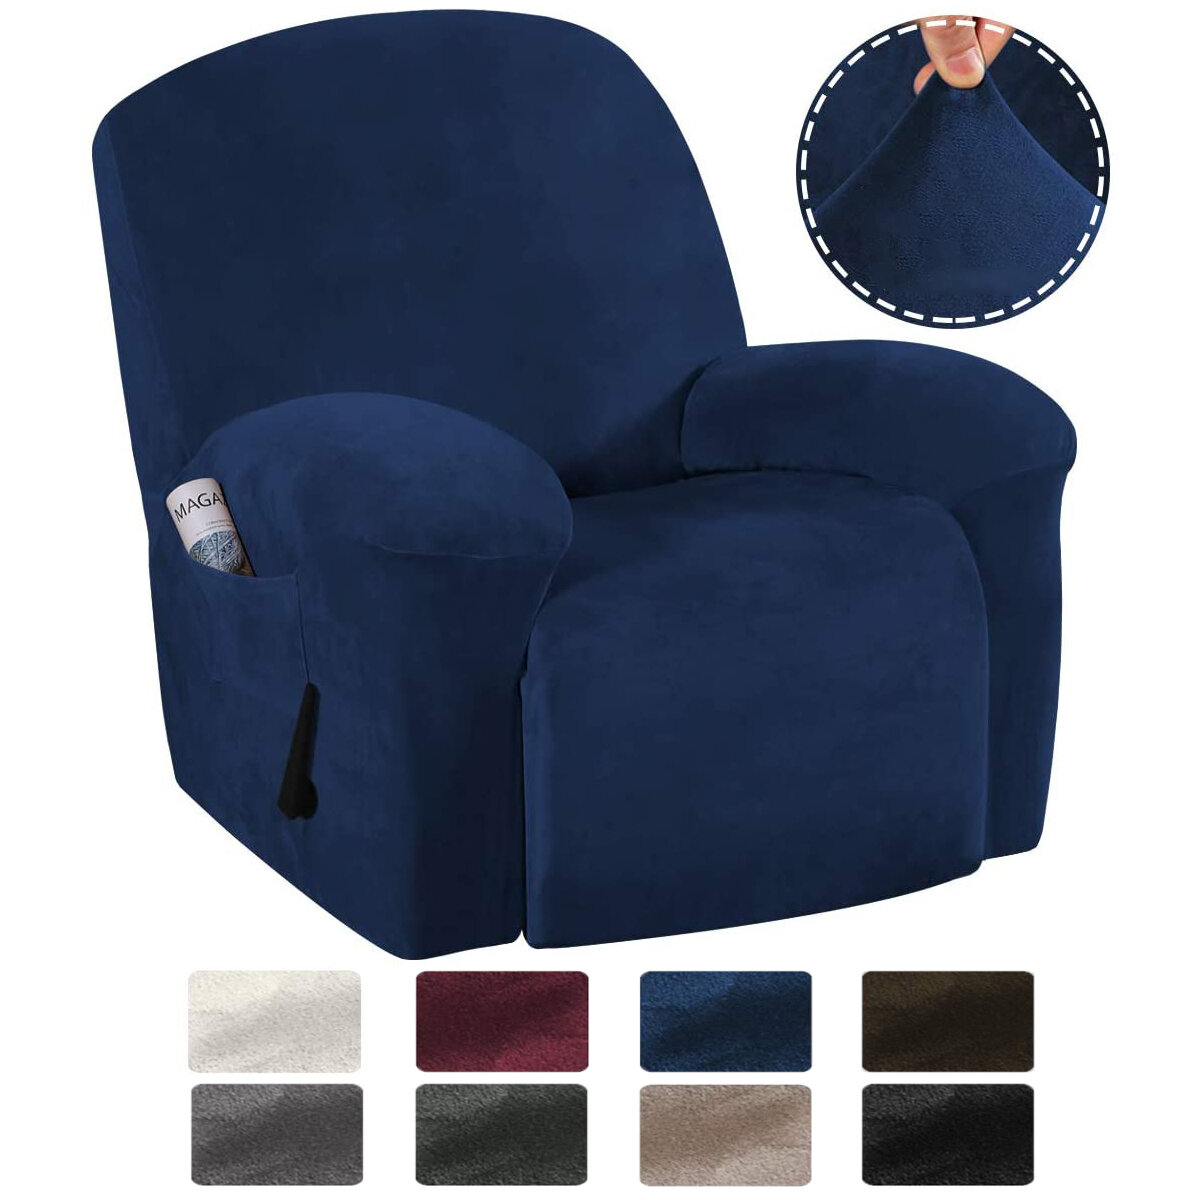 9 Colors Stretch Recliner Chair Covers Washable Fabric Non-slip Sofa Slipcovers Waterproof Seat Cover with Pocket